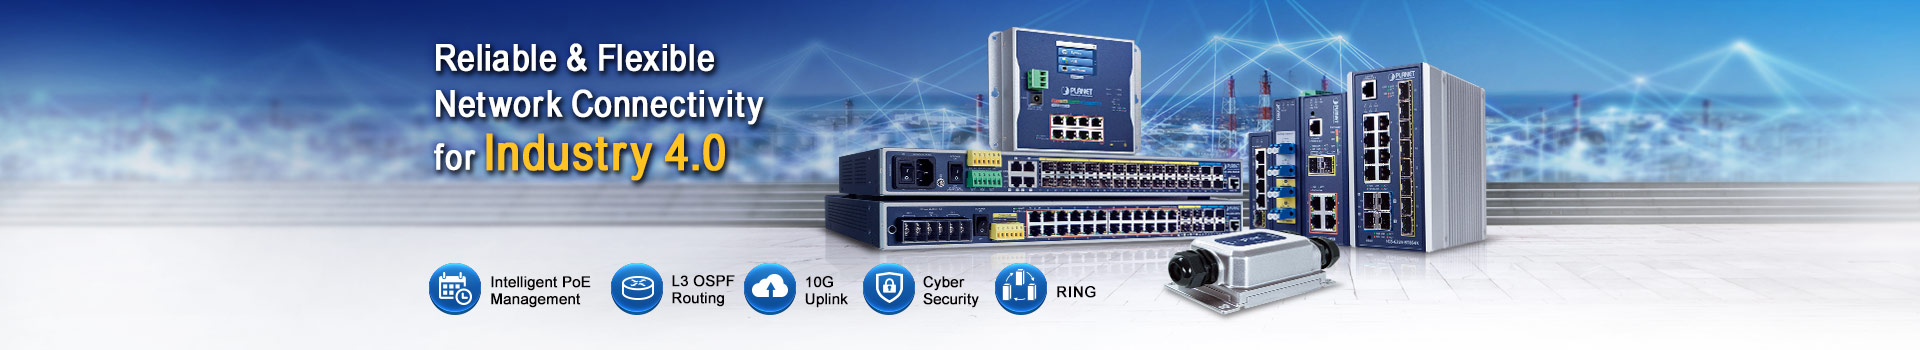 Industrial Ethernet, Reliable and Flexible Network Connectivity for Industry 4.0, L3 OSPF Routing, 10G Uplink, Cyber Security, ERPS Ring